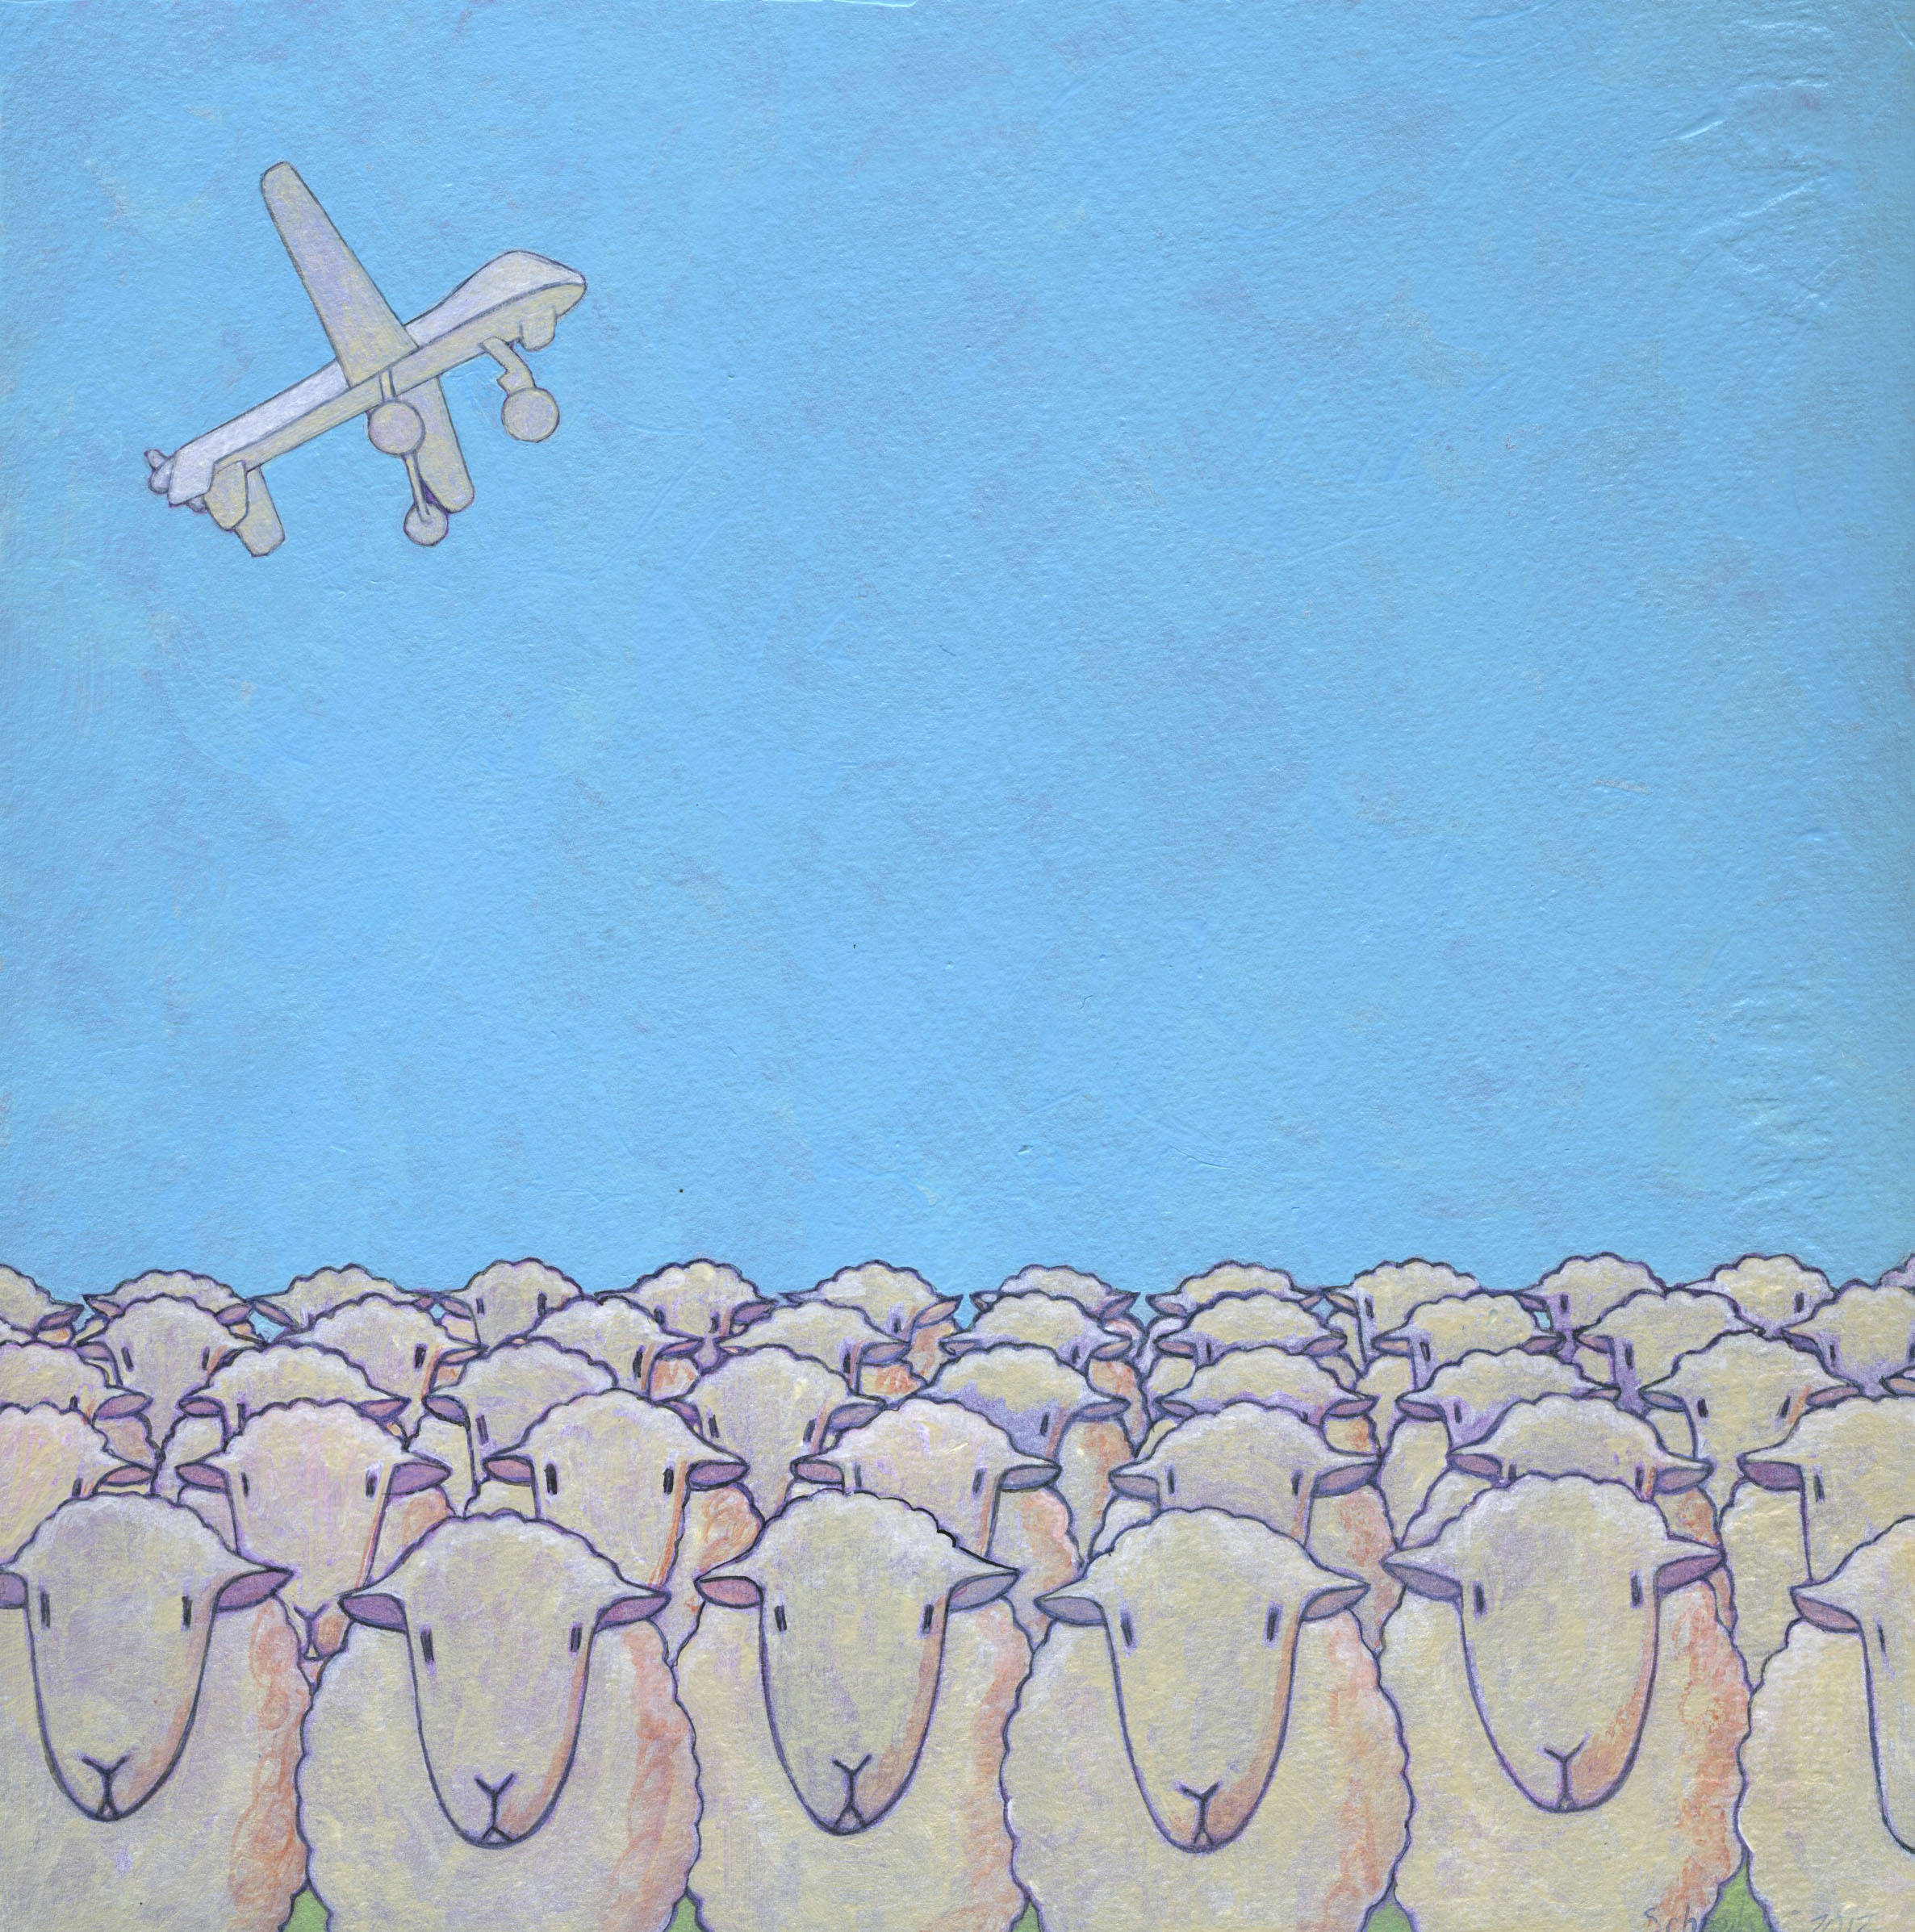   sheep in  